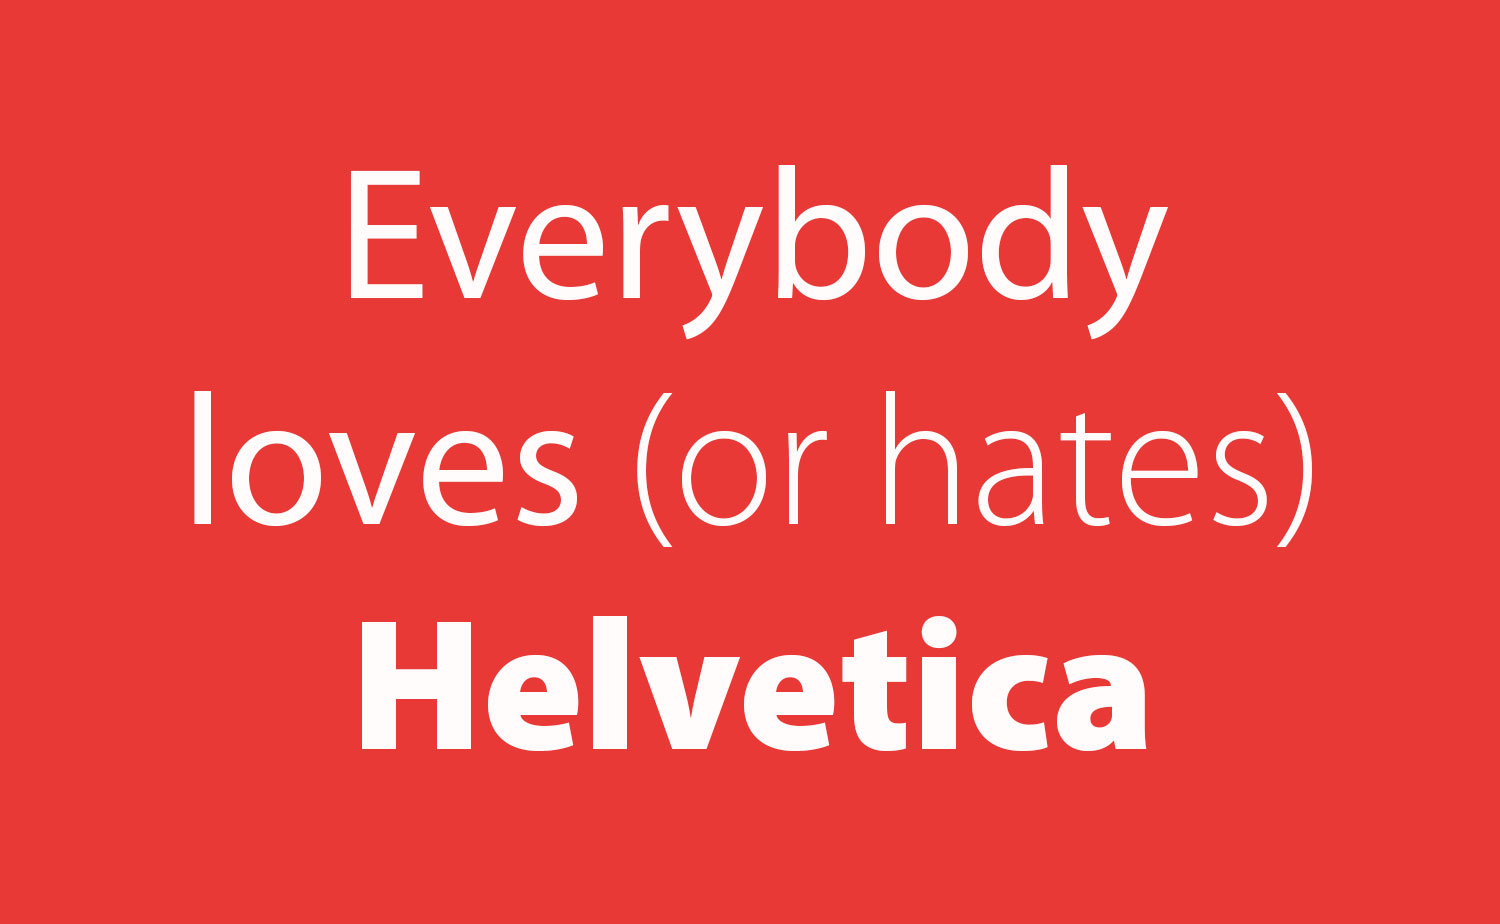 Everybody loves or hates Helvetica